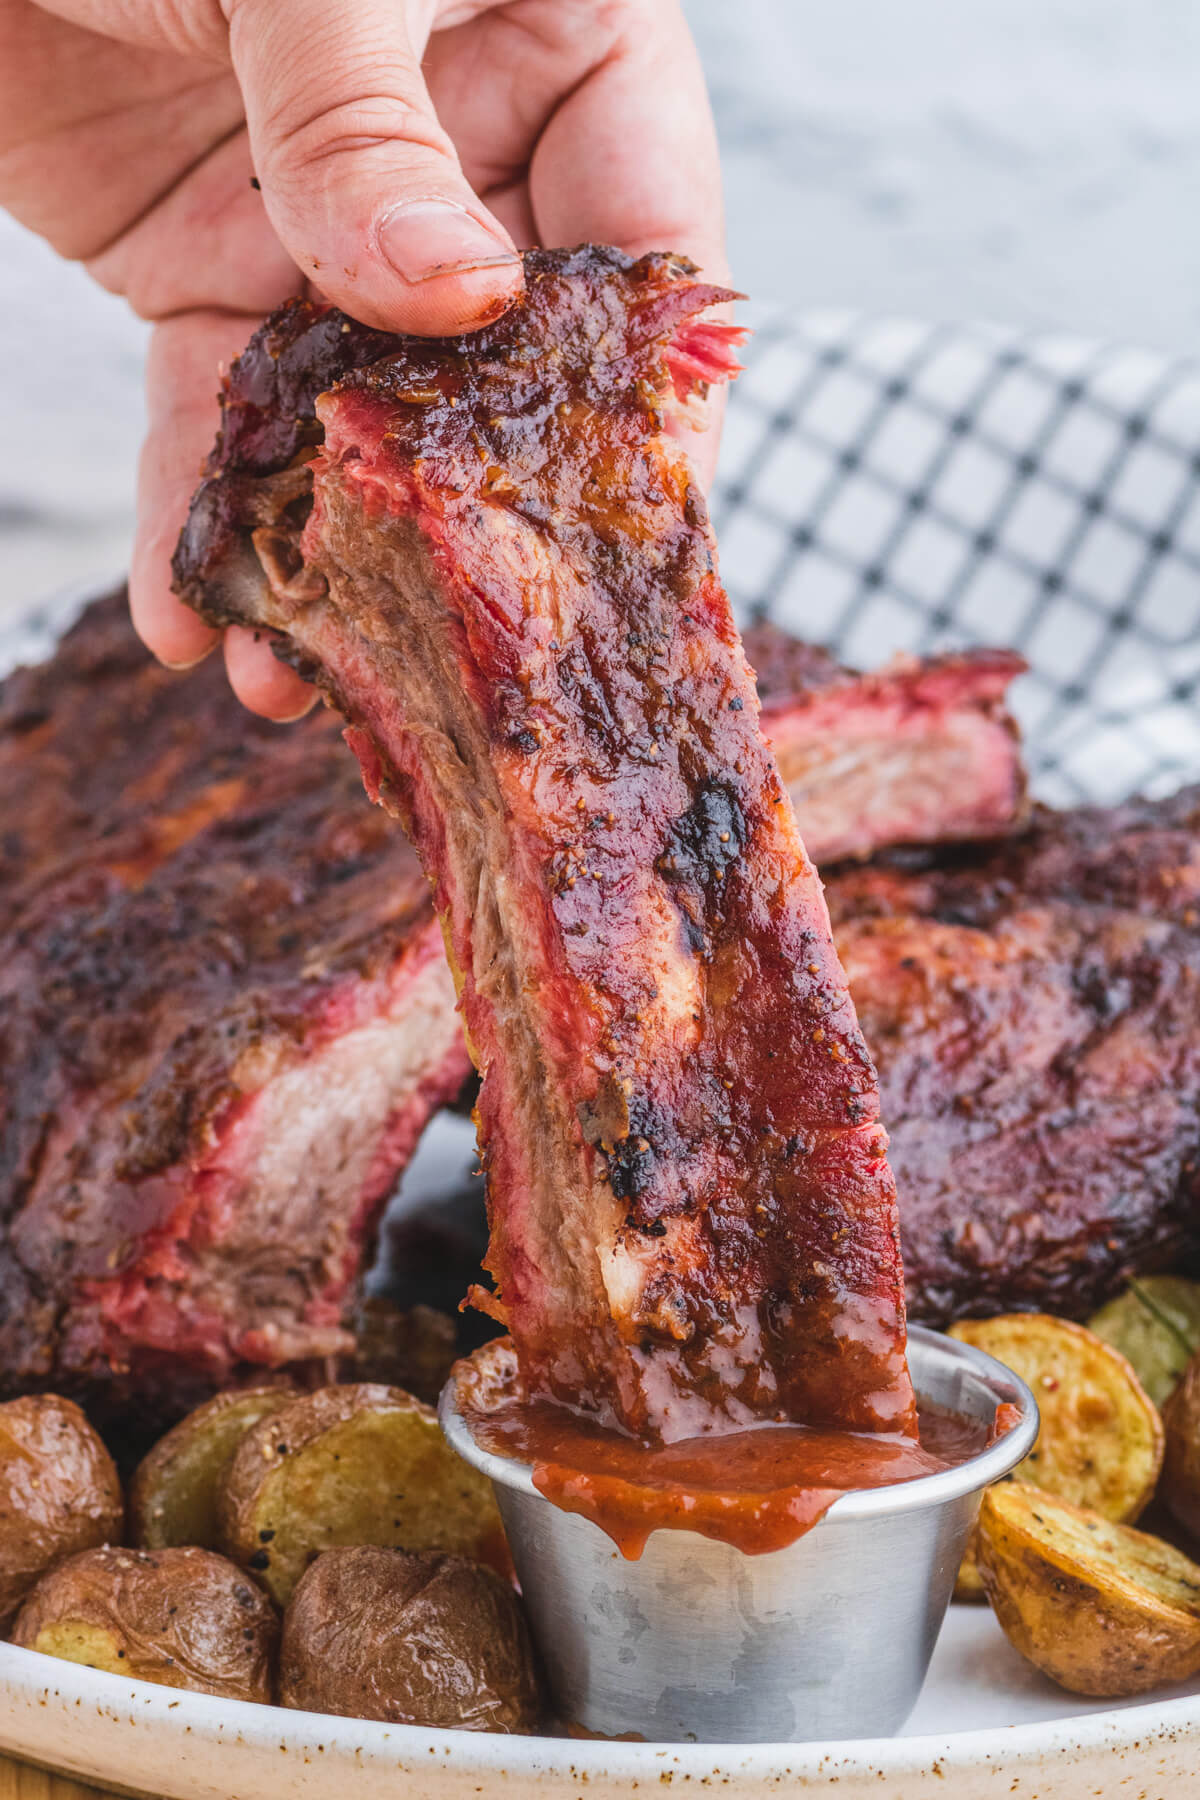 A hand dipping a smoked beef rib into a stainless steel dipping container filled with barbecue sauce.